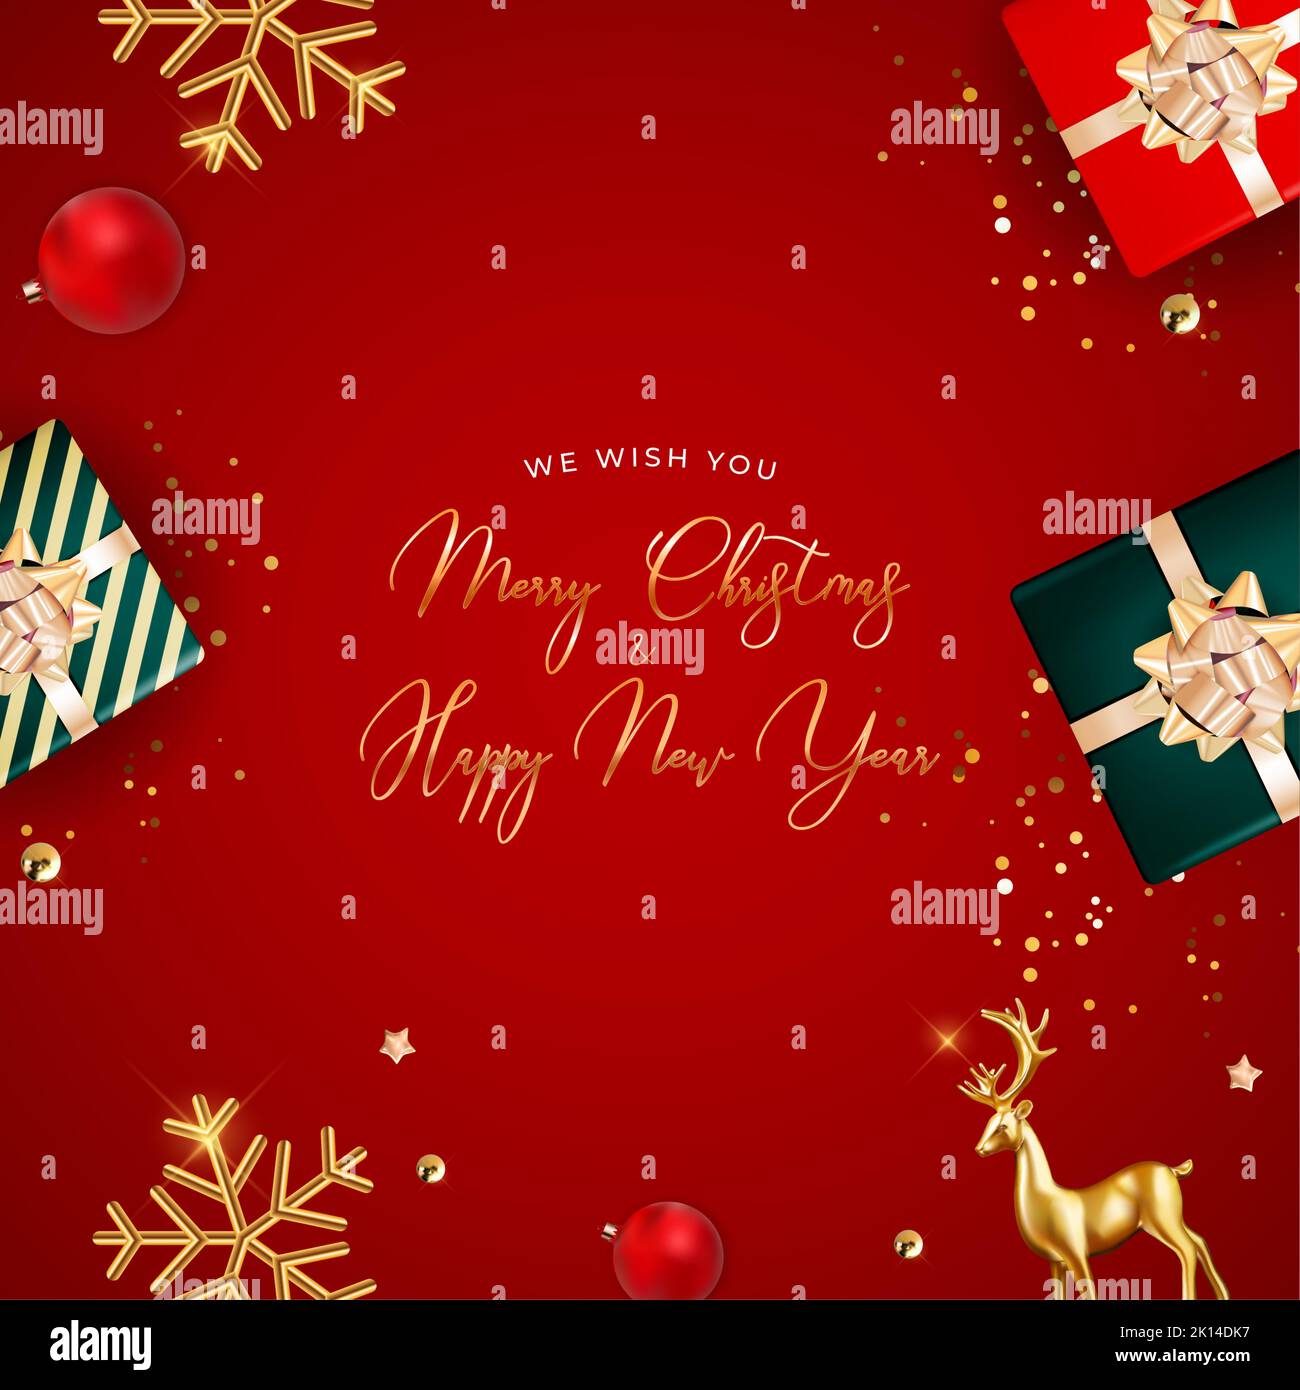 Greeting Card Merry Christmas & Happy New Year. Vector Illustration Stock Vector